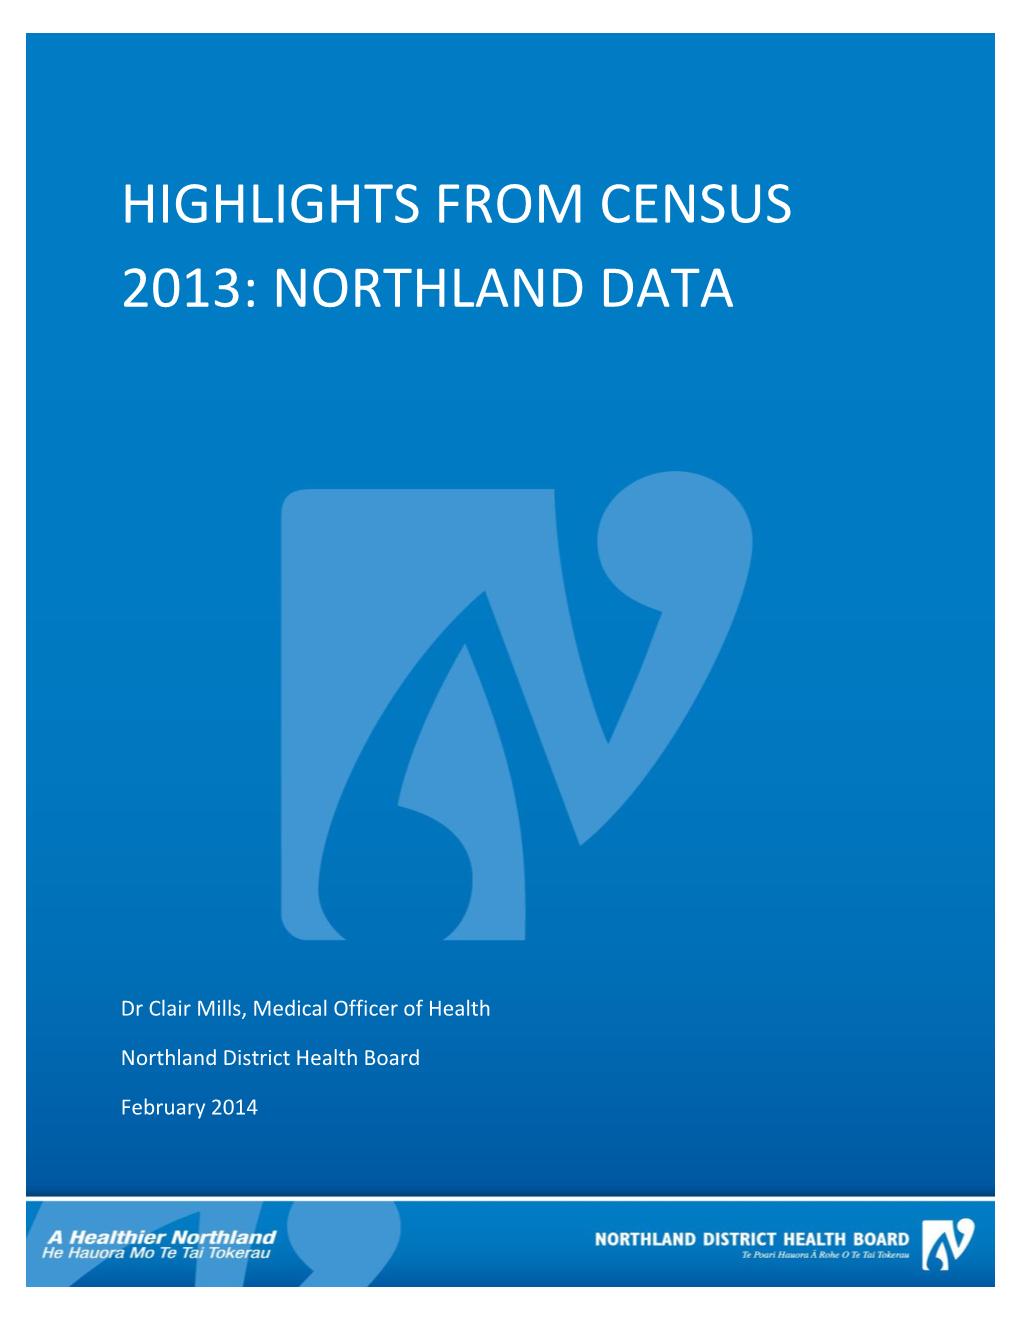 Highlights from Census 2013: Northland Data